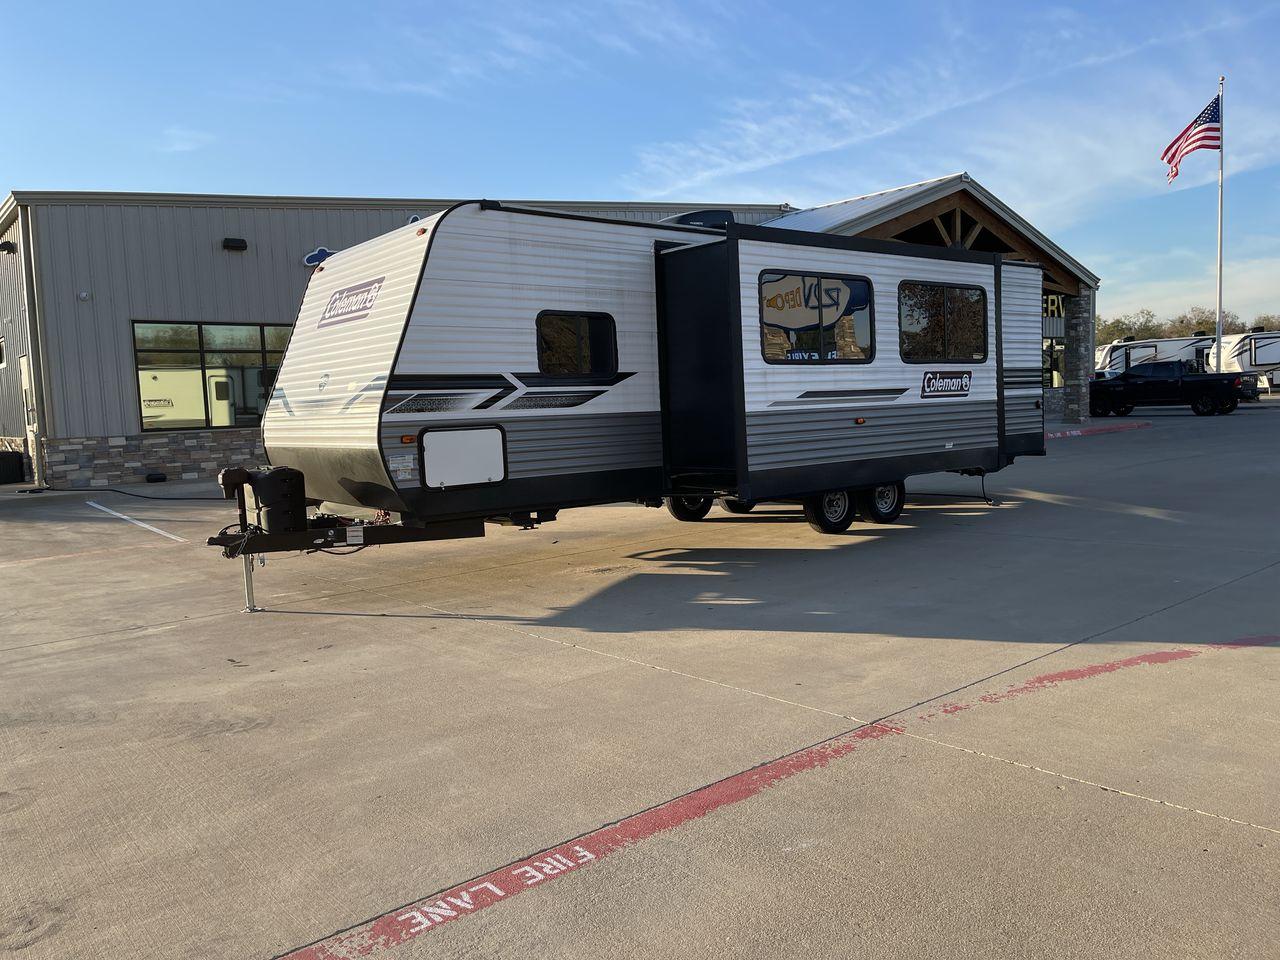 2022 KEYSTONE COLEMAN 285BH (4YDTCMN28NH) , Length: 32.75 ft | Dry Weight: 6,611 lbs. | Slides: 1 transmission, located at 4319 N Main Street, Cleburne, TX, 76033, (817) 221-0660, 32.435829, -97.384178 - Experience the ultimate blend of comfort and adventure with the 2022 Keystone Coleman 285BH. This meticulously designed travel trailer is perfect for enhancing your camping experience. Adjusting the specifications, this model extends to a generous 32.75 feet with a dry weight of 6,611 lbs, providing - Photo #25